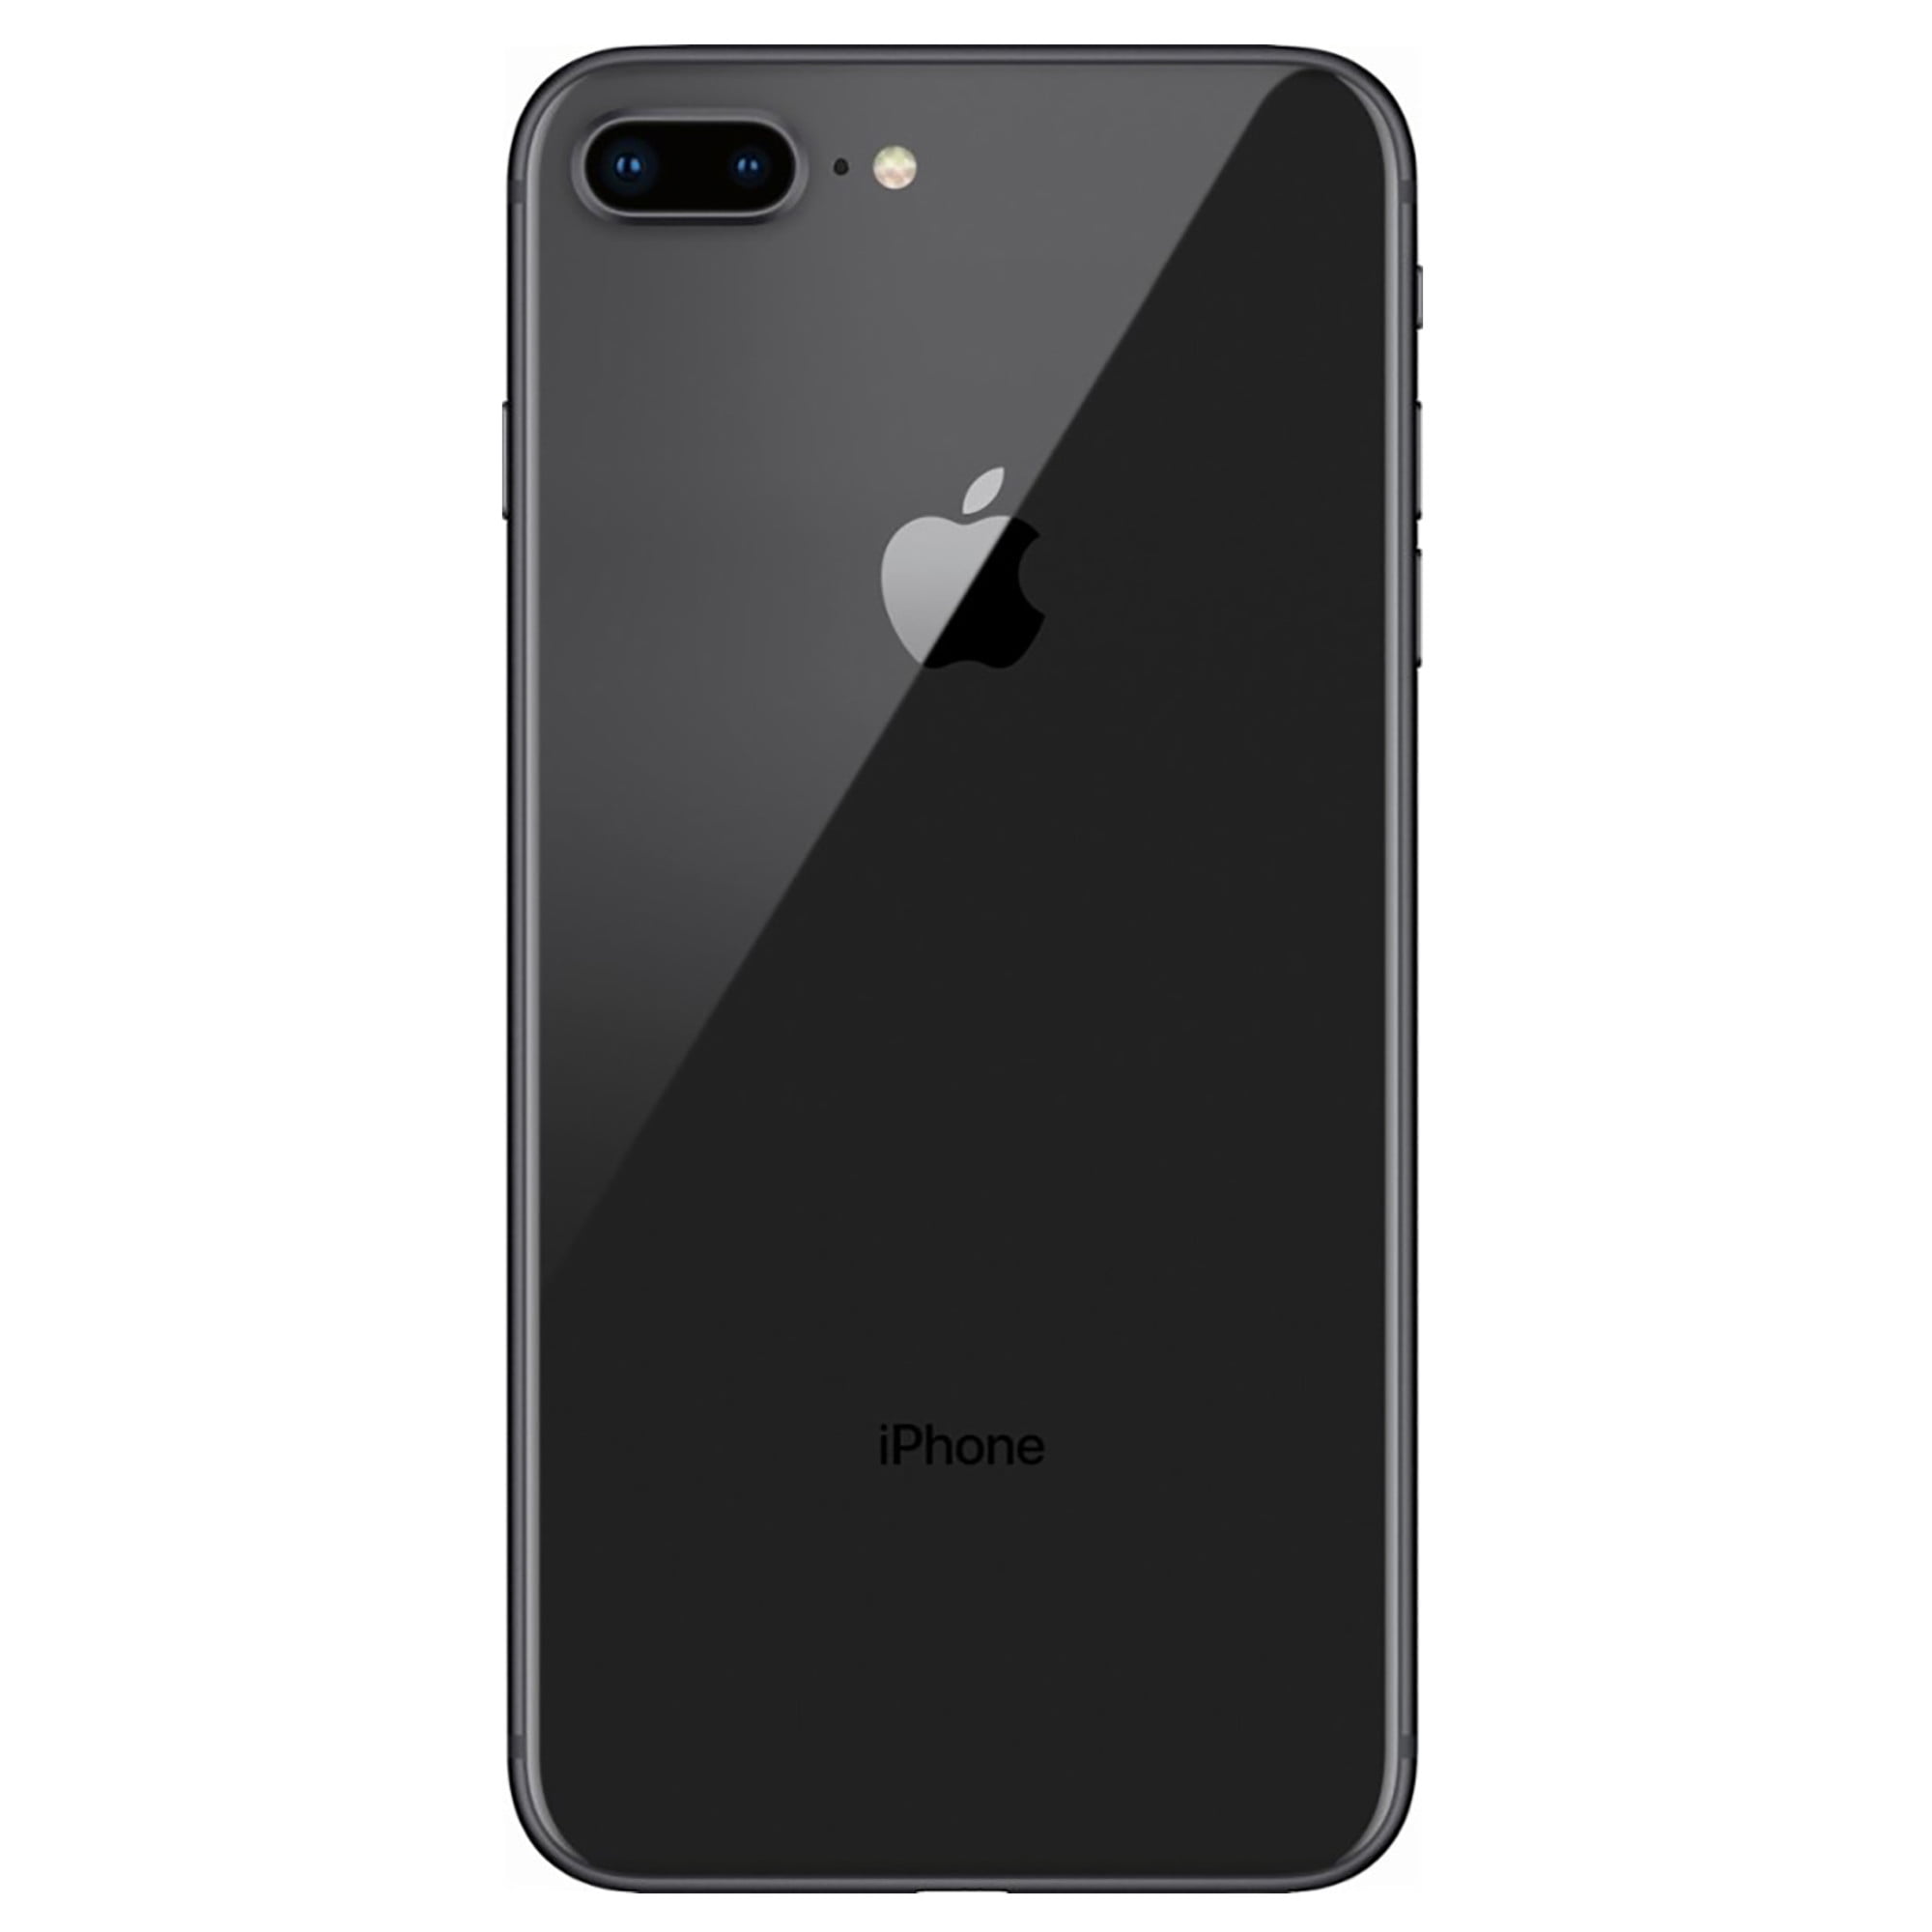 Apple iPhone 8 Plus 256GB Space Gray Fully Unlocked (Verizon + AT&T +  T-Mobile + Sprint) Smartphone - Grade B Used